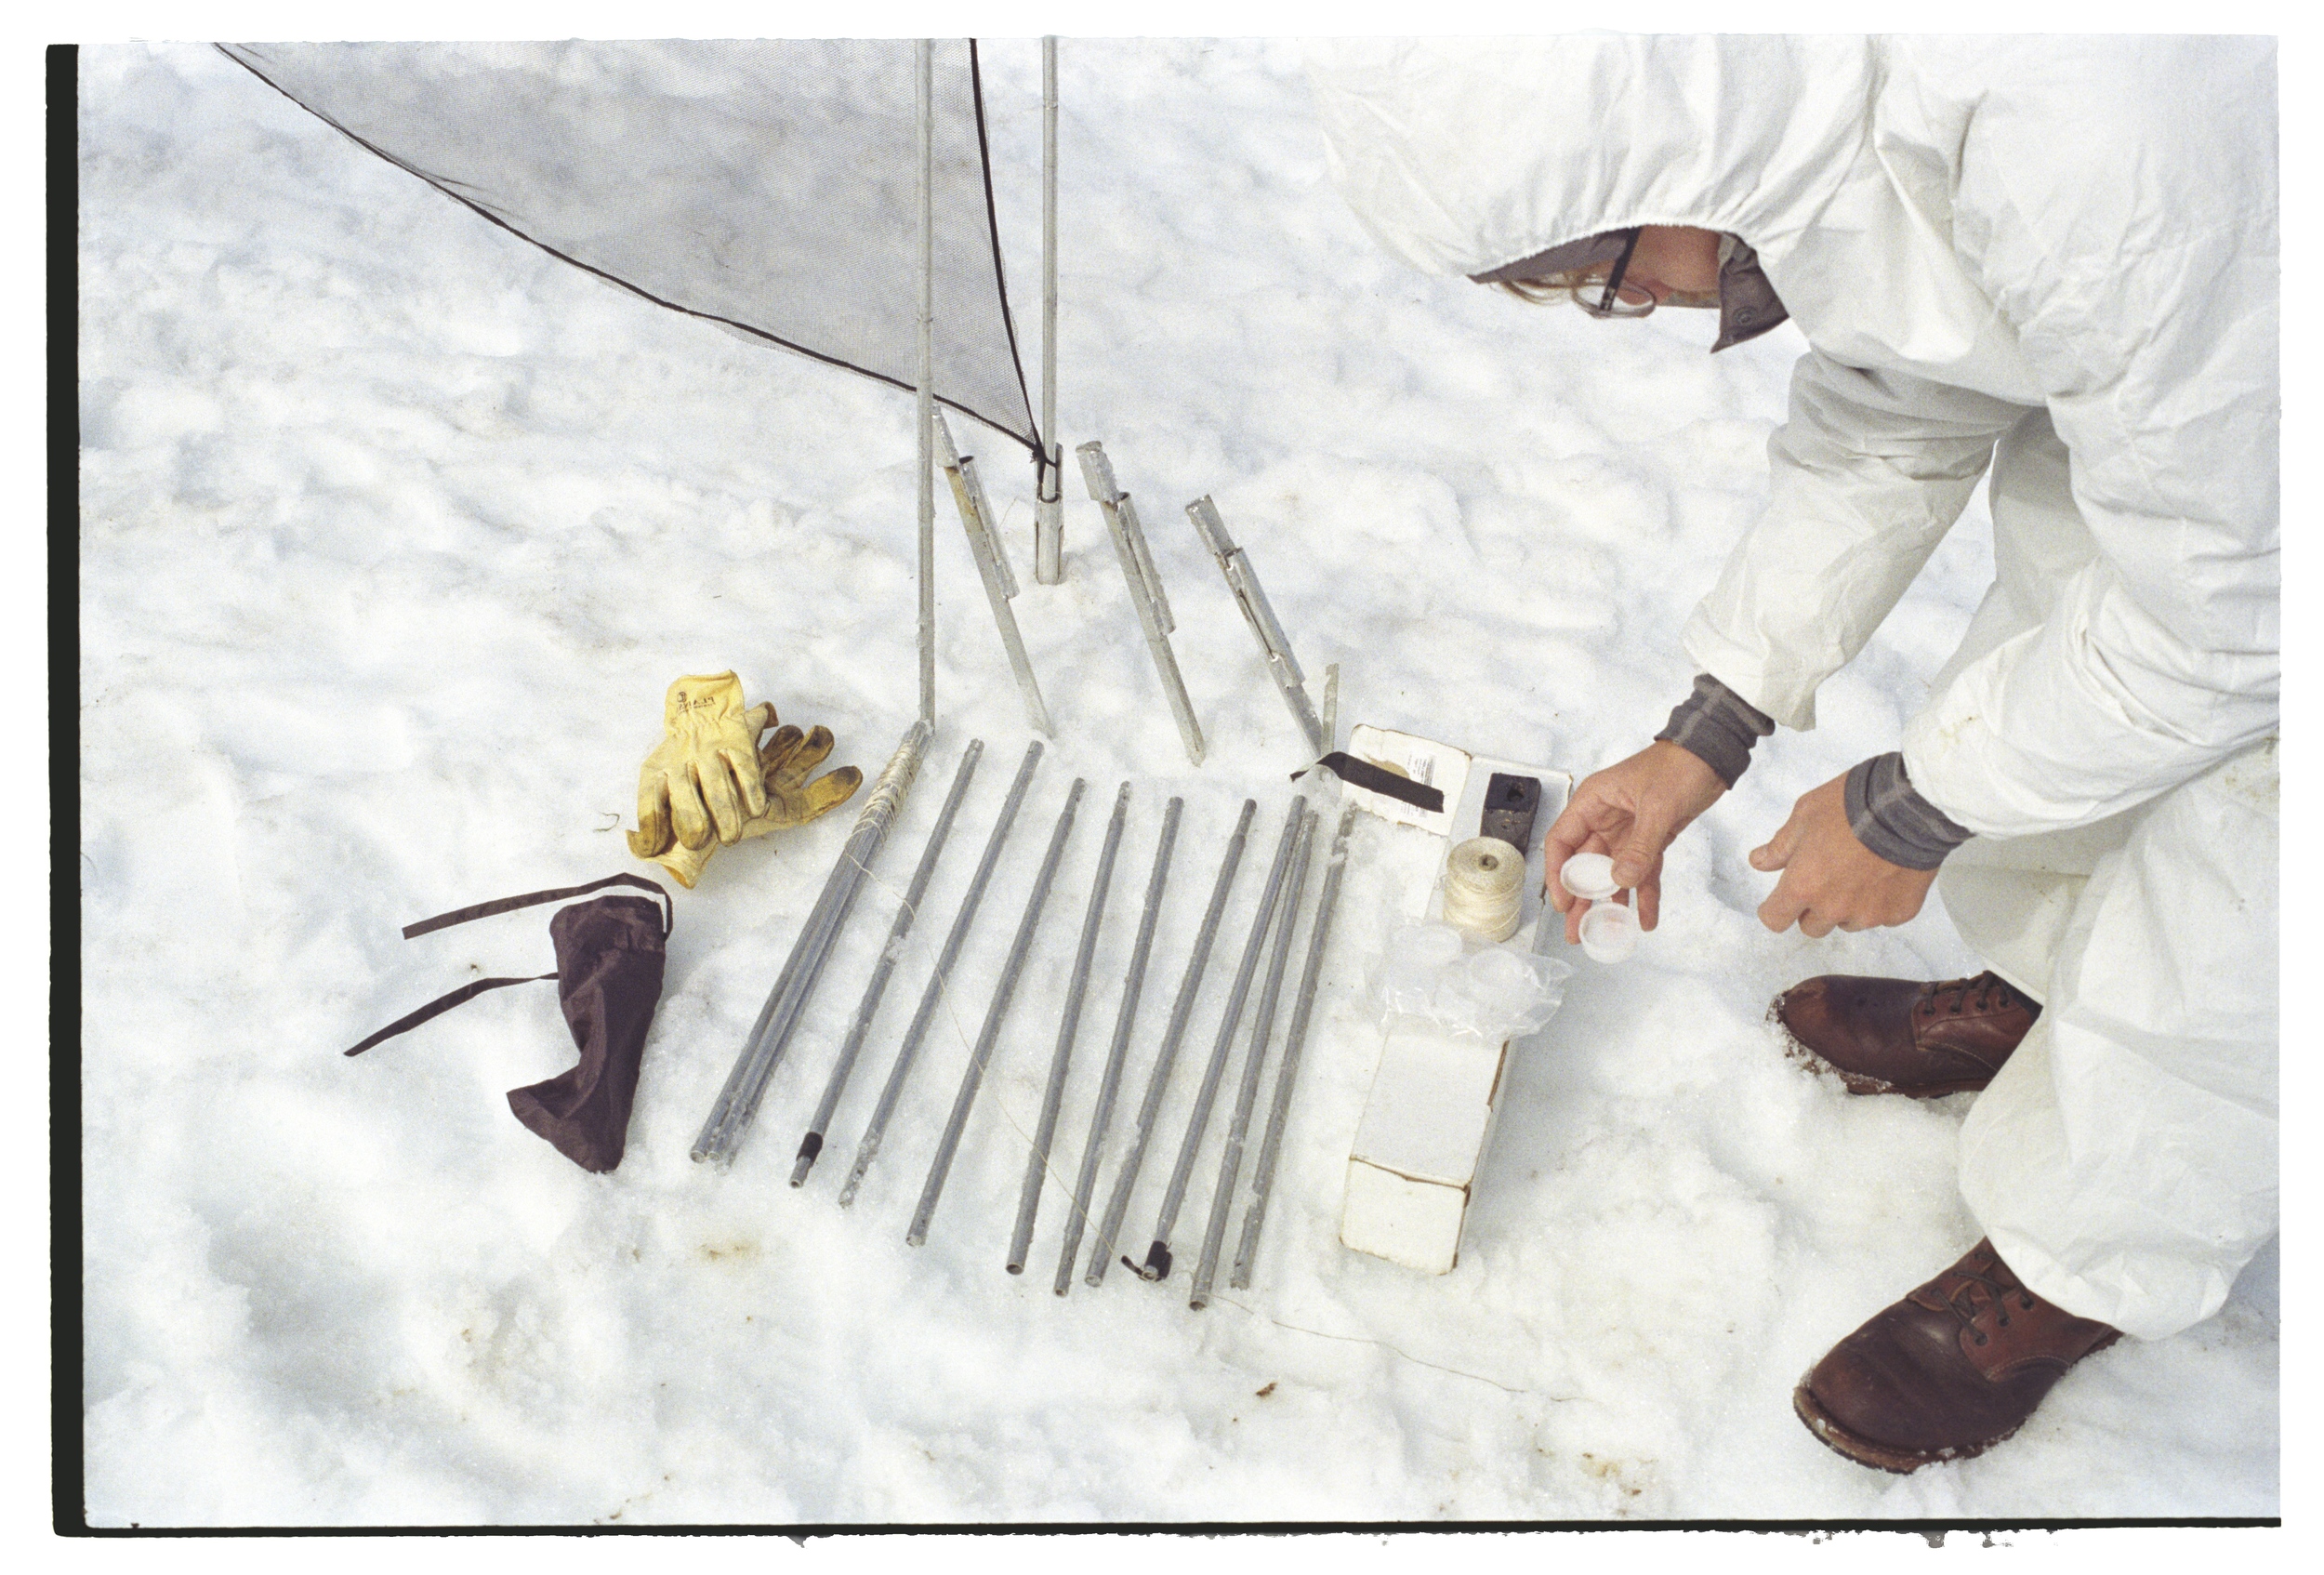 c with glaicer tools.jpg